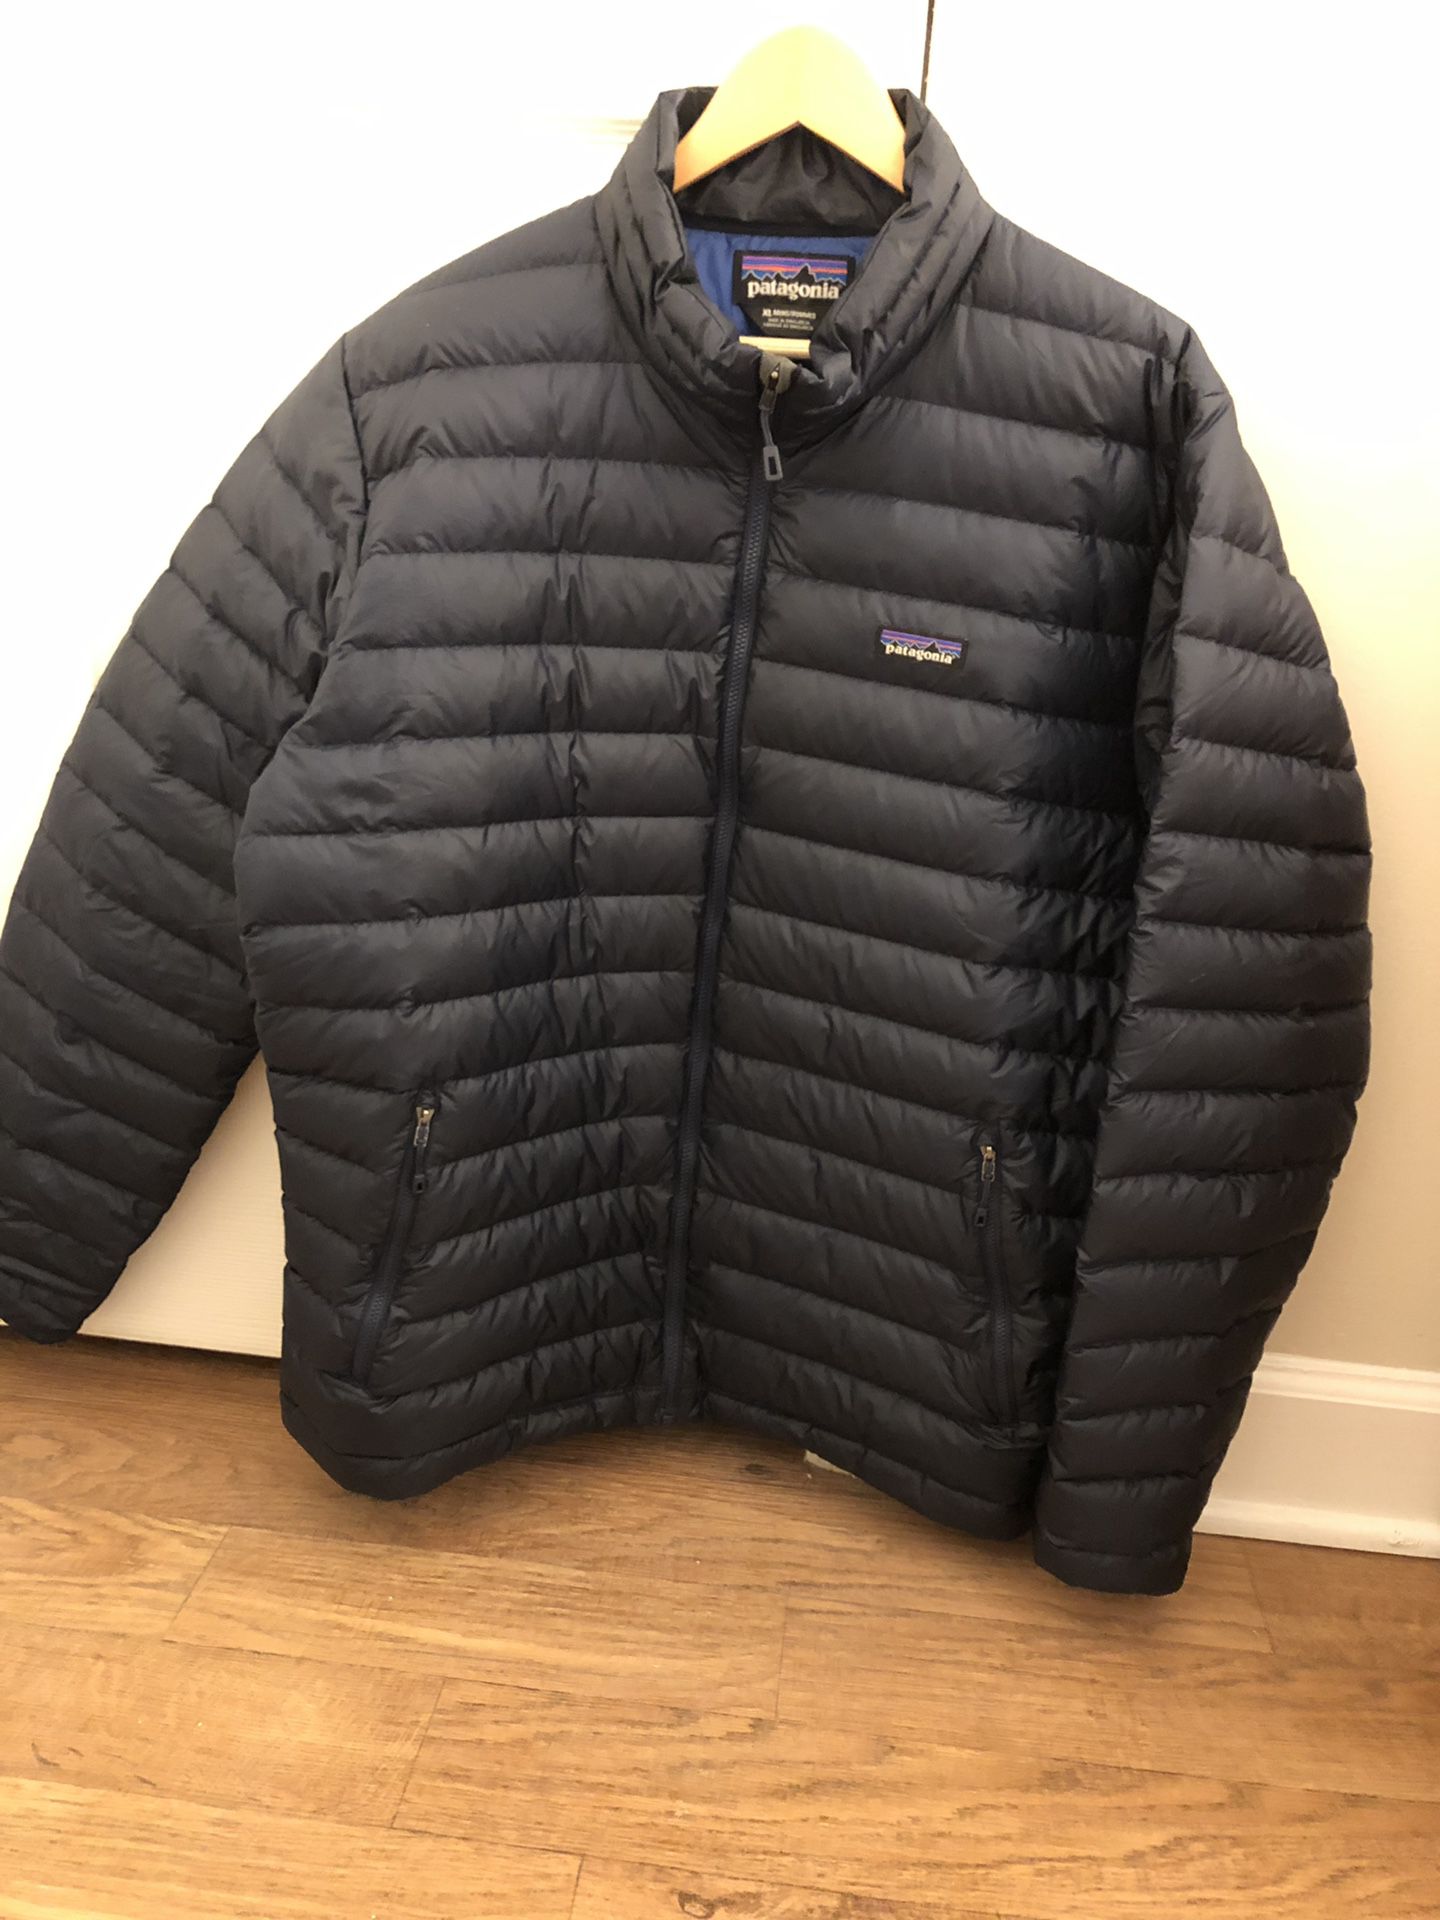 Need gone today!!! Patagonia puffer xl!! Like new